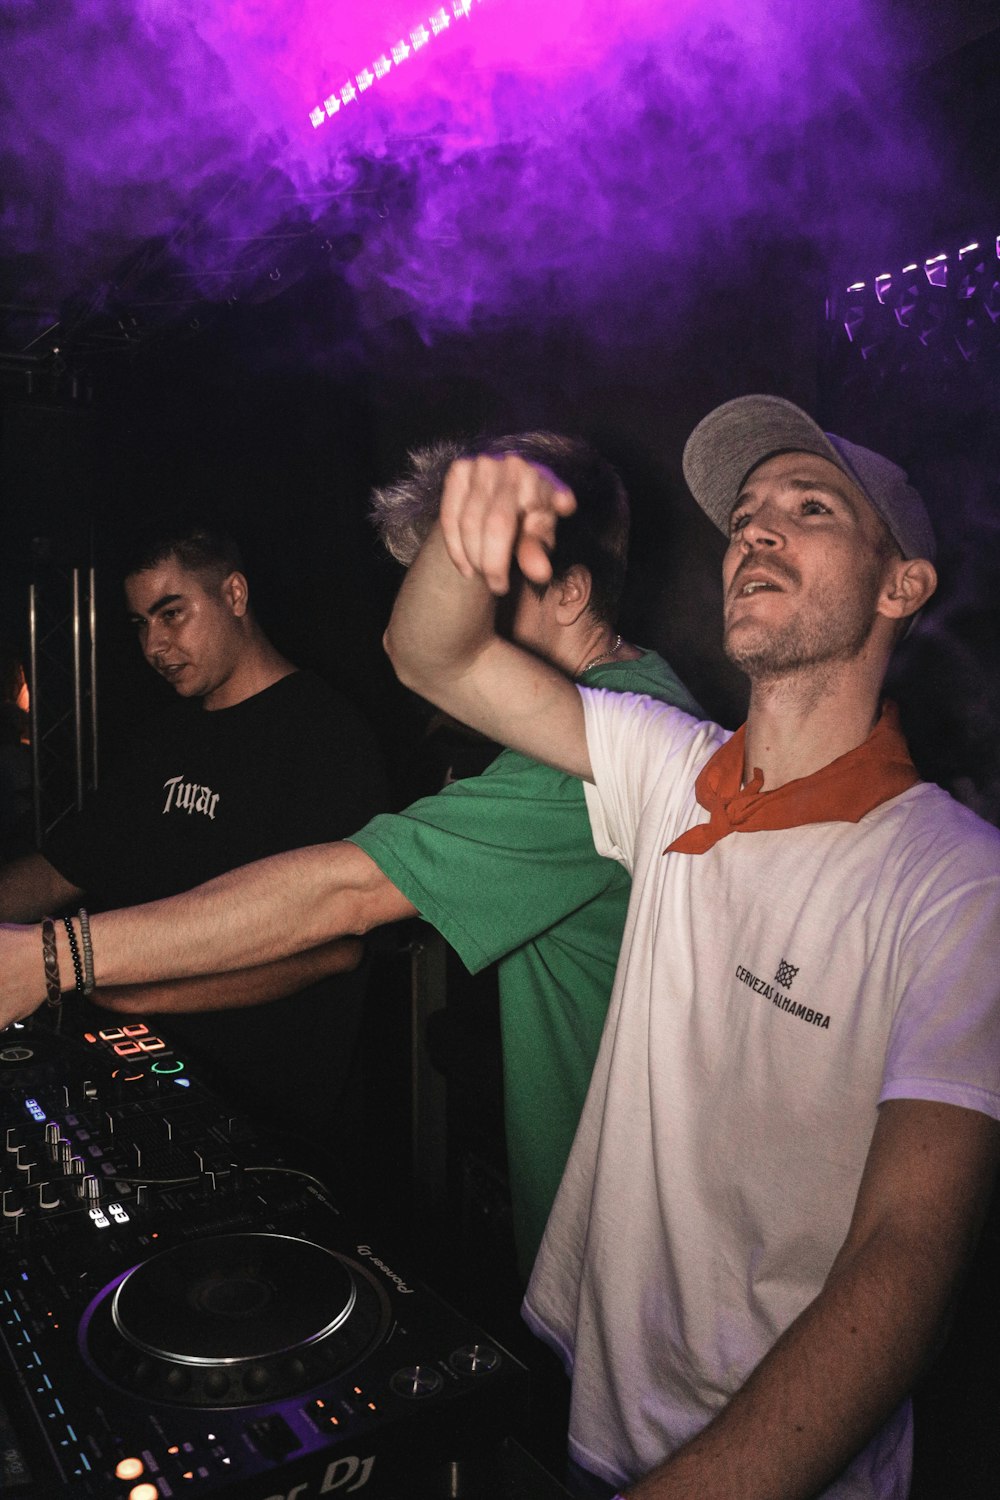 a man standing next to a dj in front of a purple light